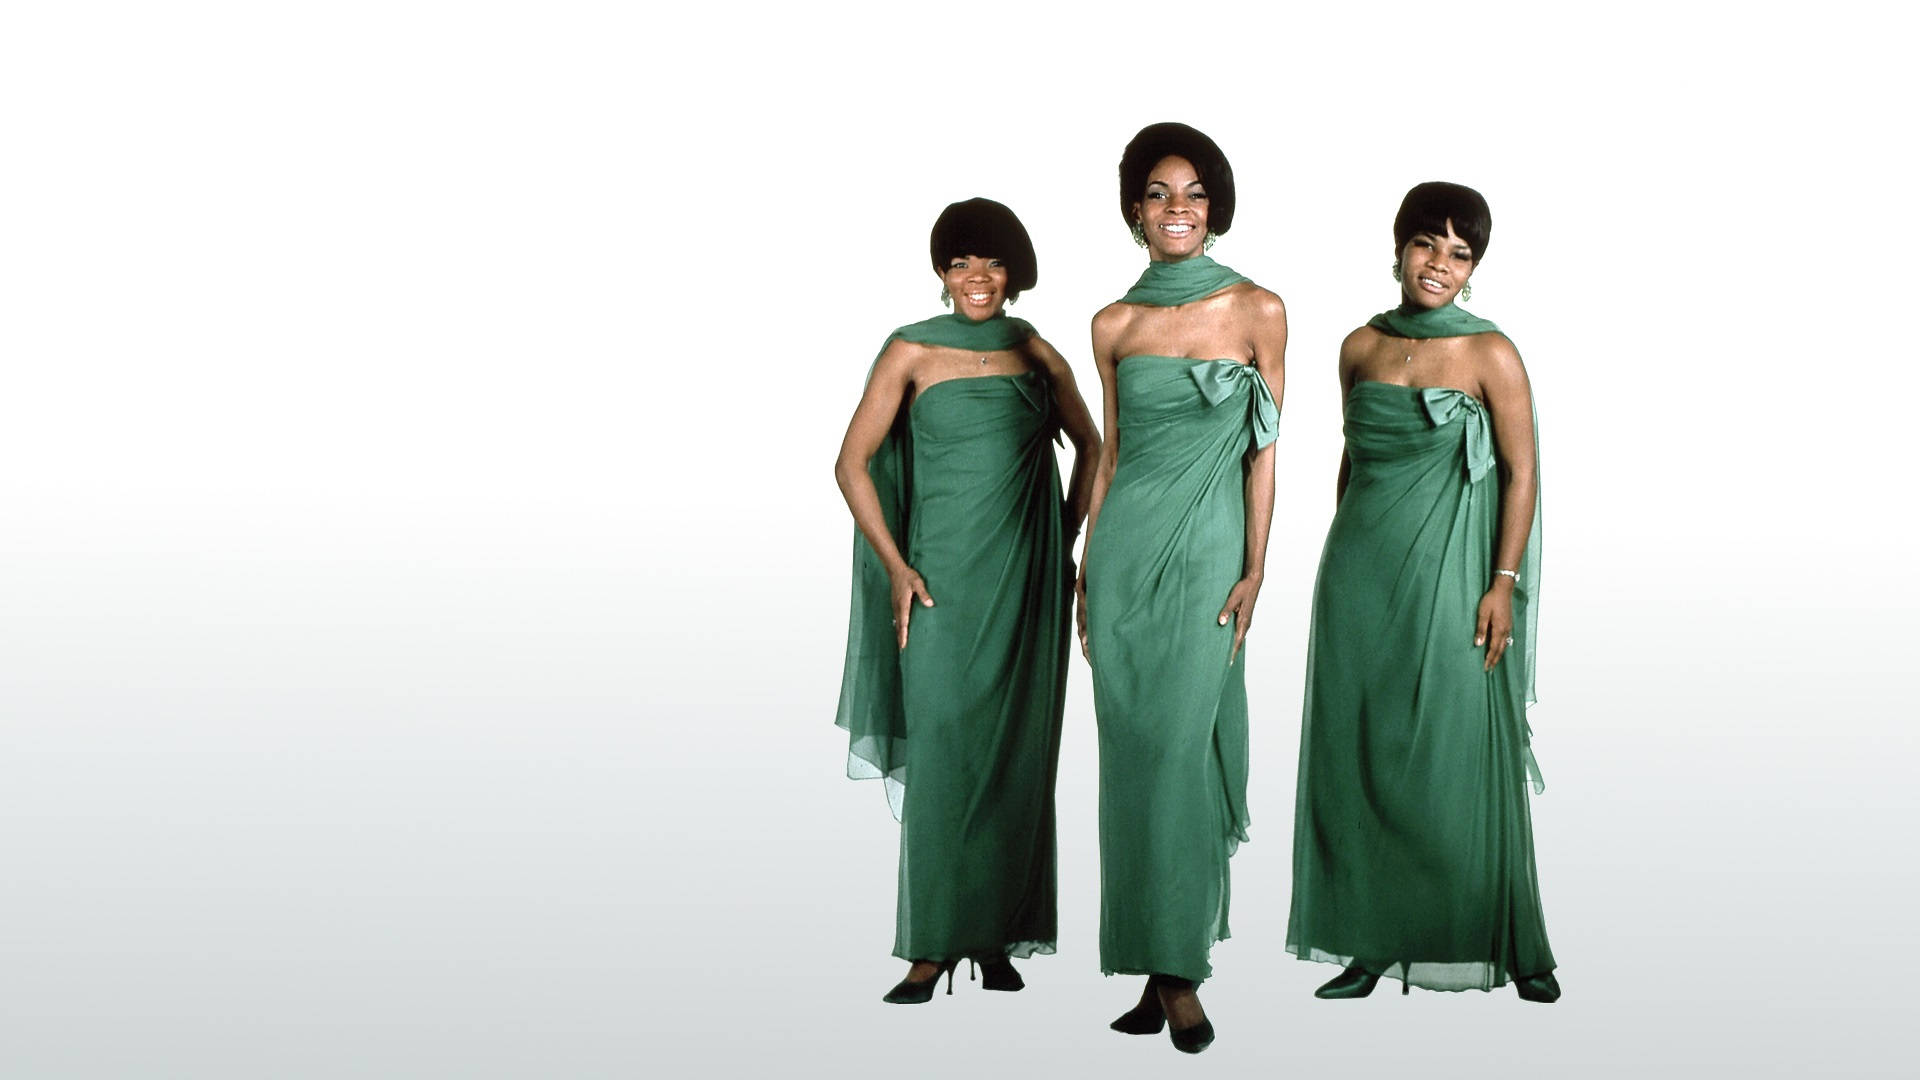 Martha And The Vandellas 70's Group Wallpaper